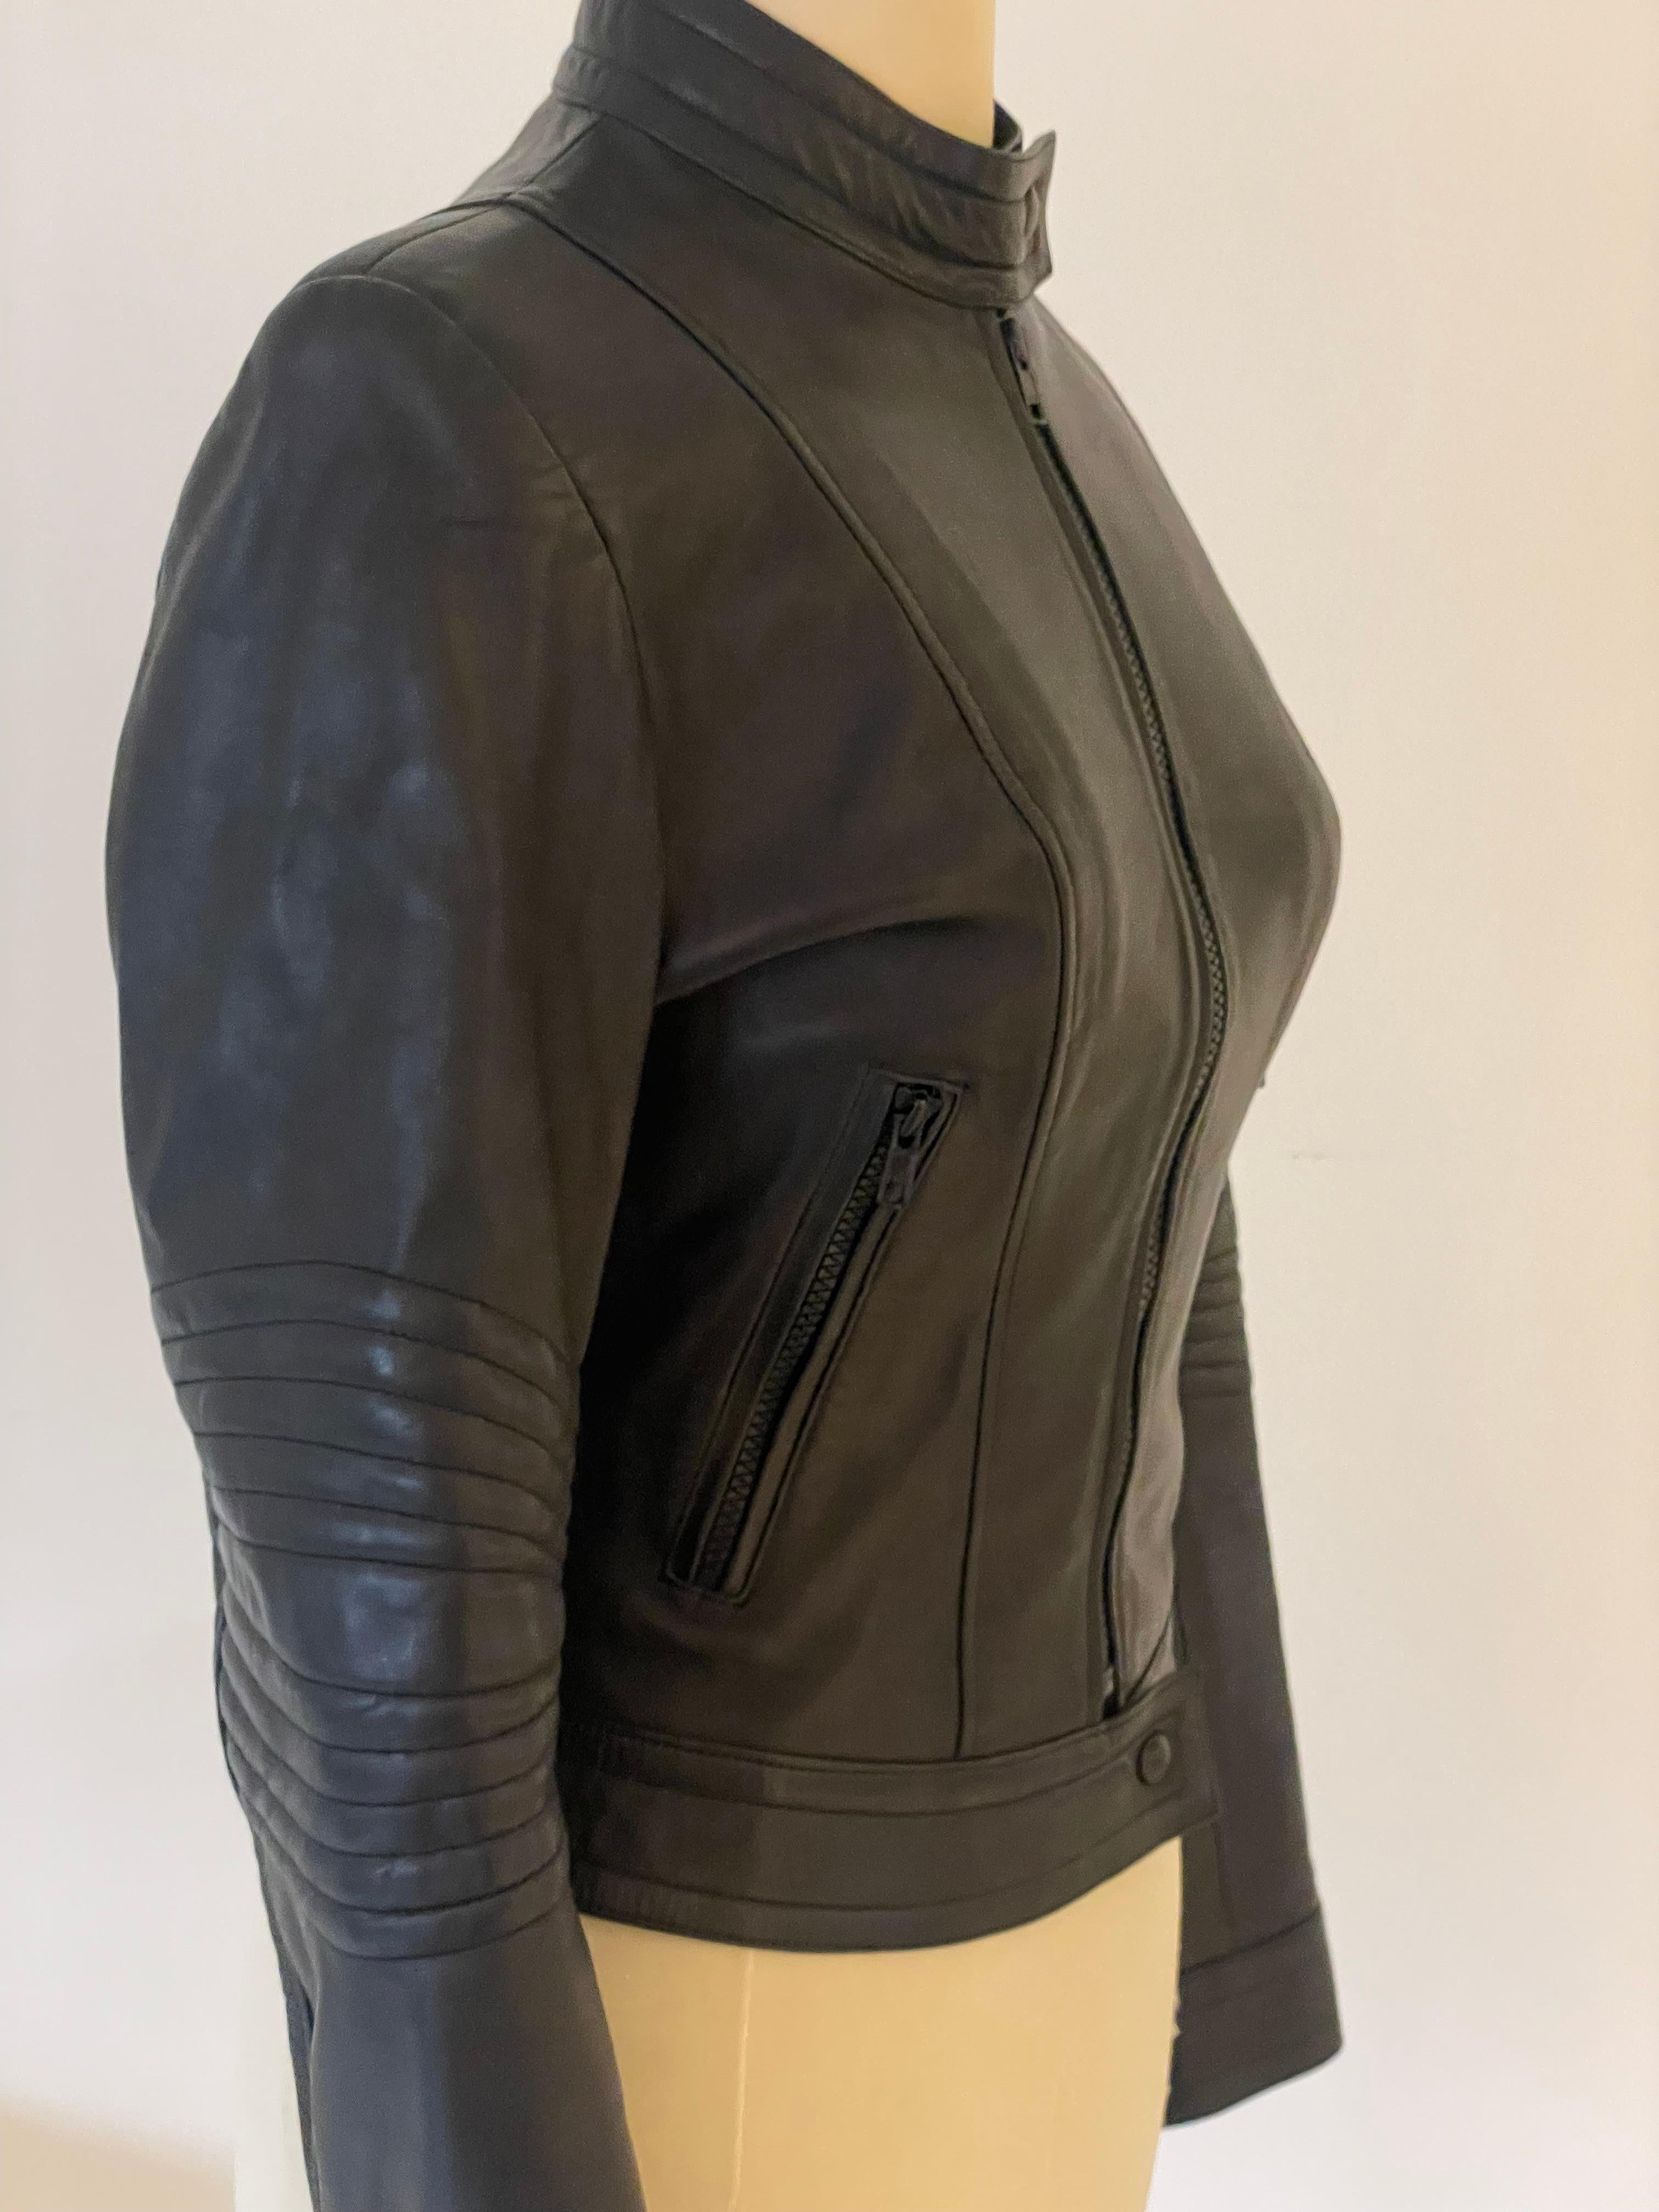 Very UNIQUE item this JEAN CLAUDE JITROIS vintage (excellent condition, never worn) black leather ribbed MOTO BIKE JACKET from the 90s. Snap button collar. Zip front. Ribbed detailing at elbow. Jean-Claude Jitrois is a French fashion designer known